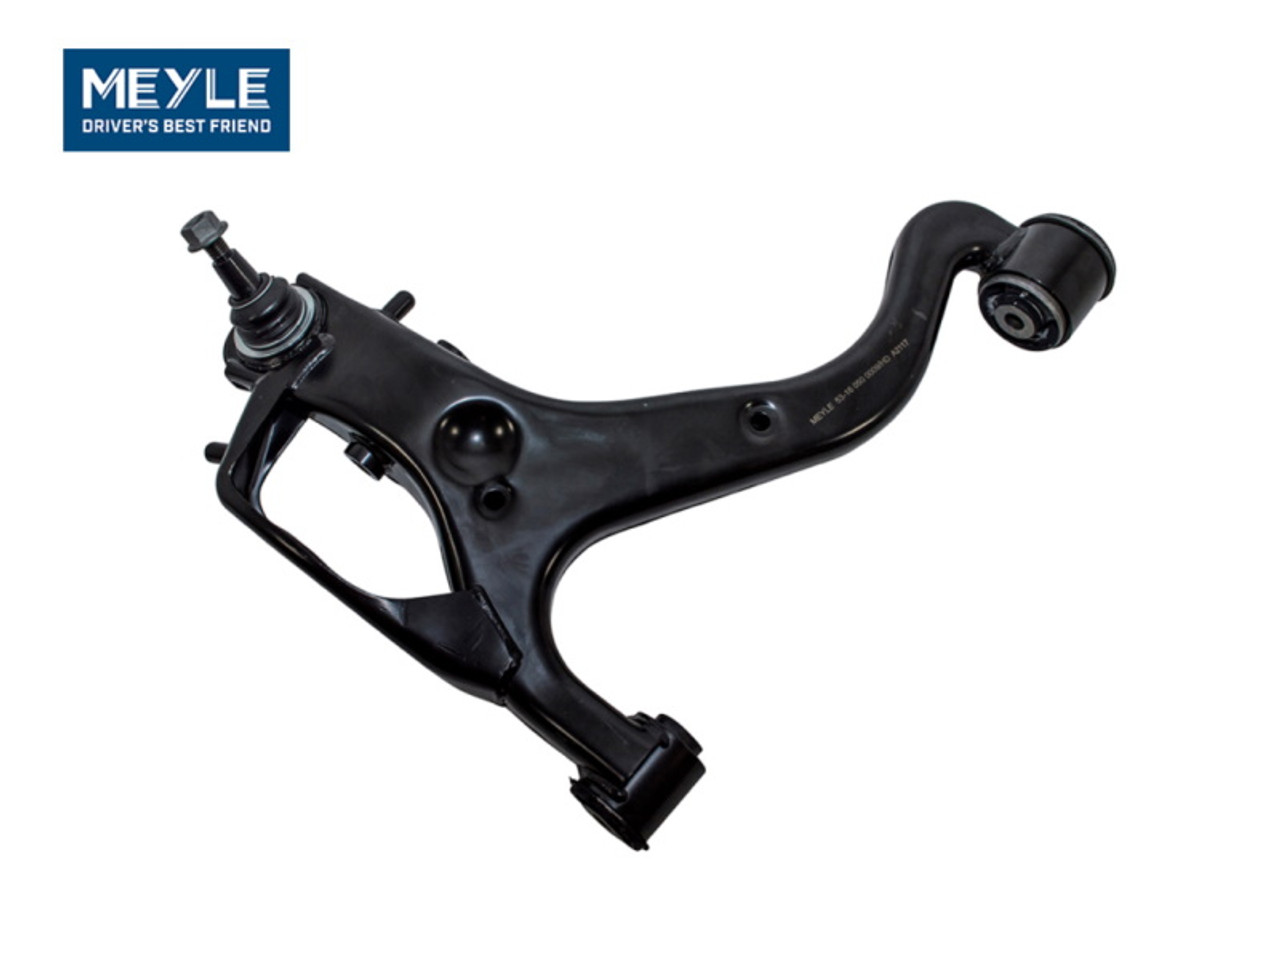 Meyle Range Rover Sport LH Heavy Duty Front Lower Arm With Air Suspension - LR029306HD